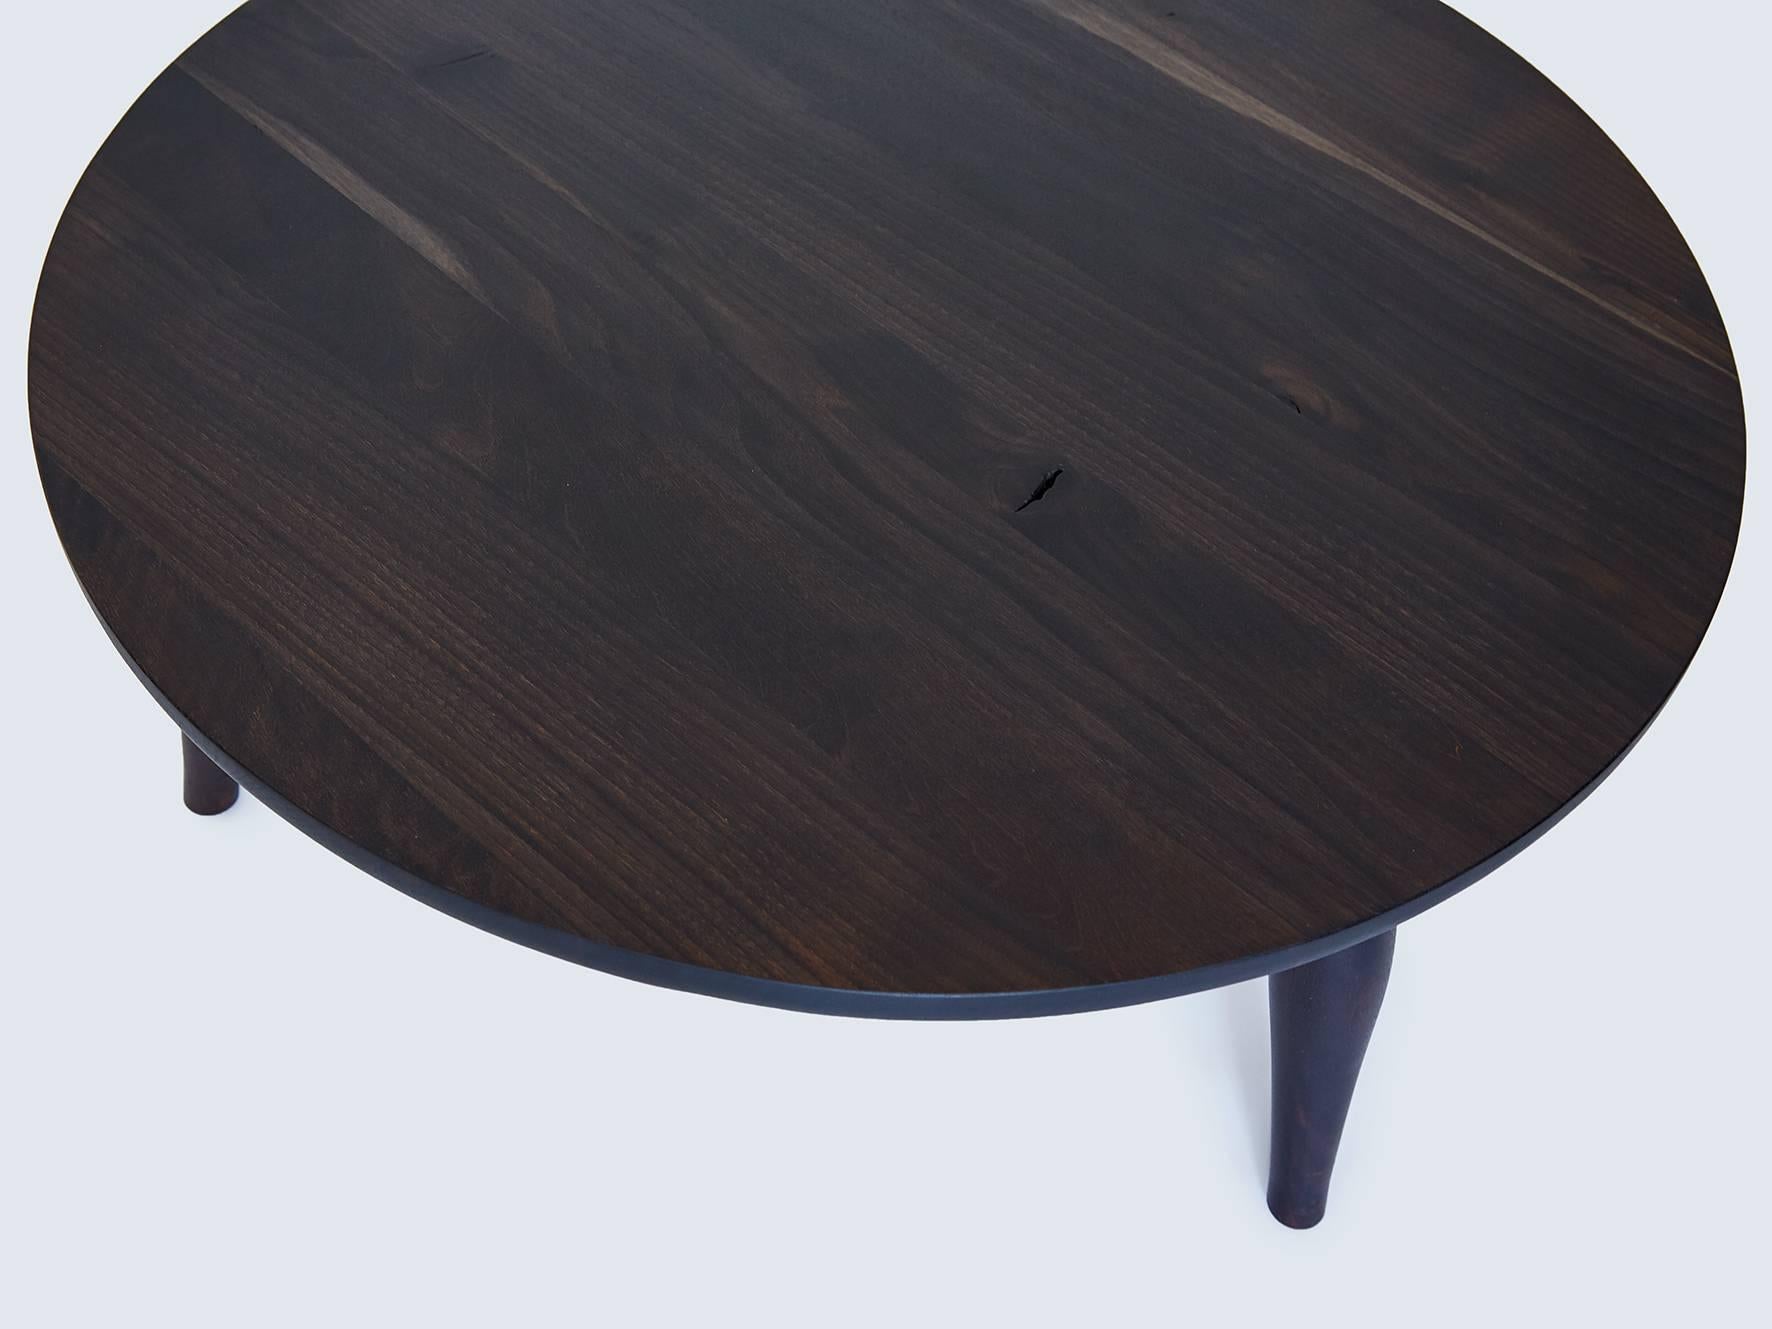 The Swell coffee table features Fern's signature turned swell legs. Available in black walnut (natural, oxidized and ebonized), maple (natural, bleached and oxidized), cherry and white oak (natural and oxidized).

Custom sizing available.